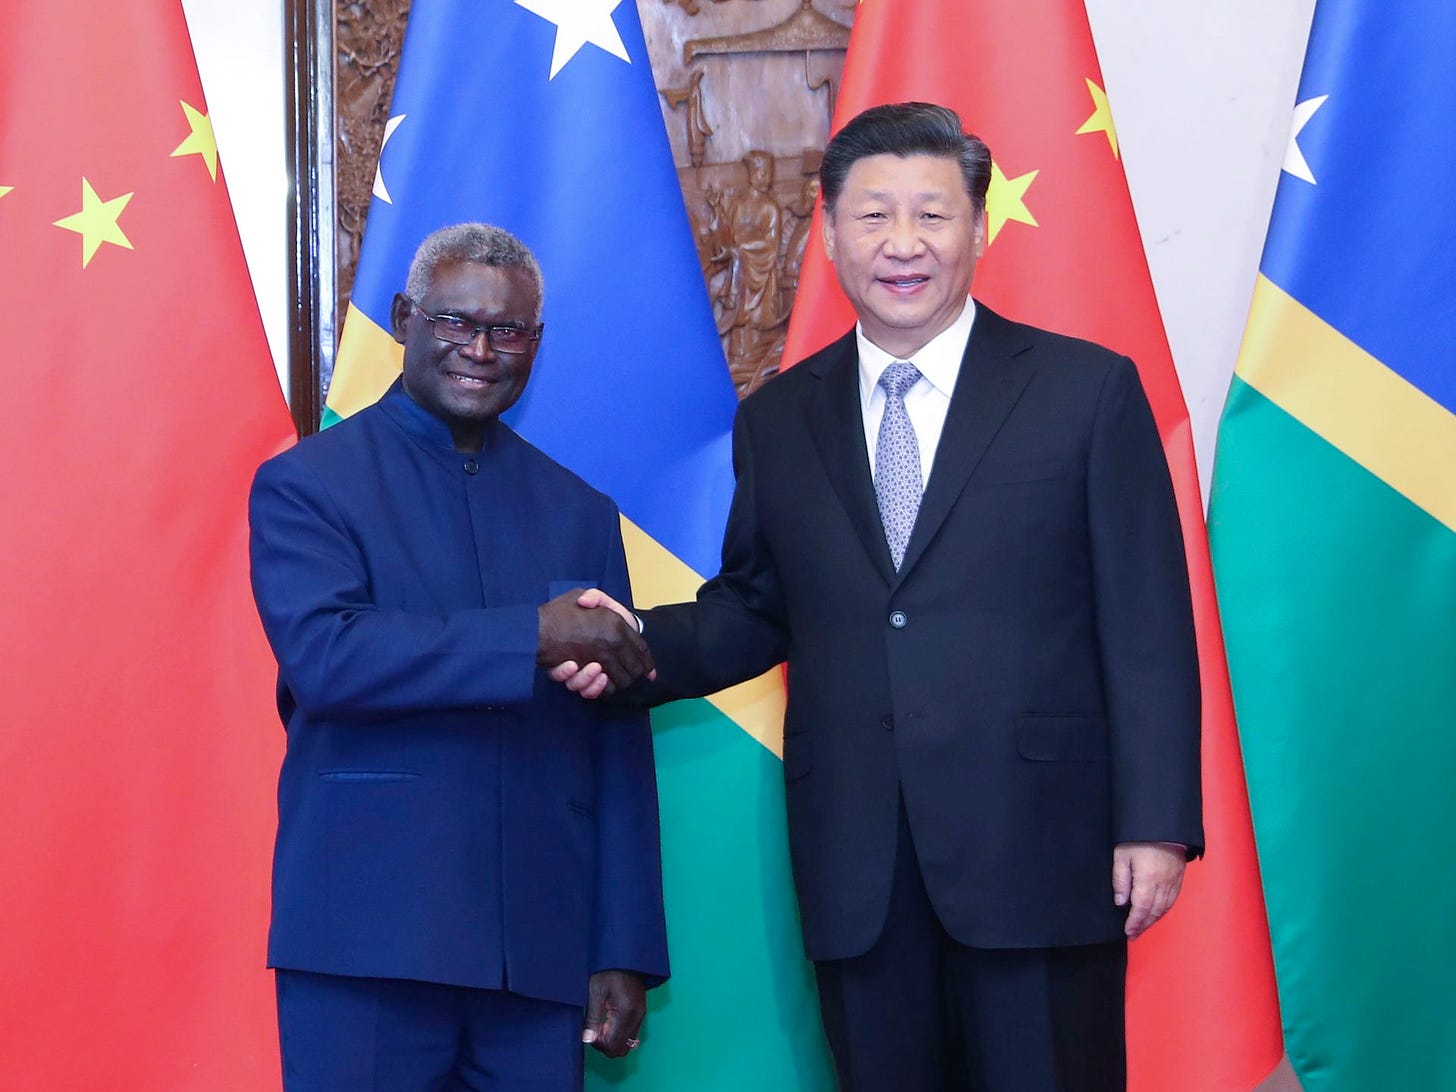 Solomon Islands becomes unlikely epicenter of U.S.-China competition